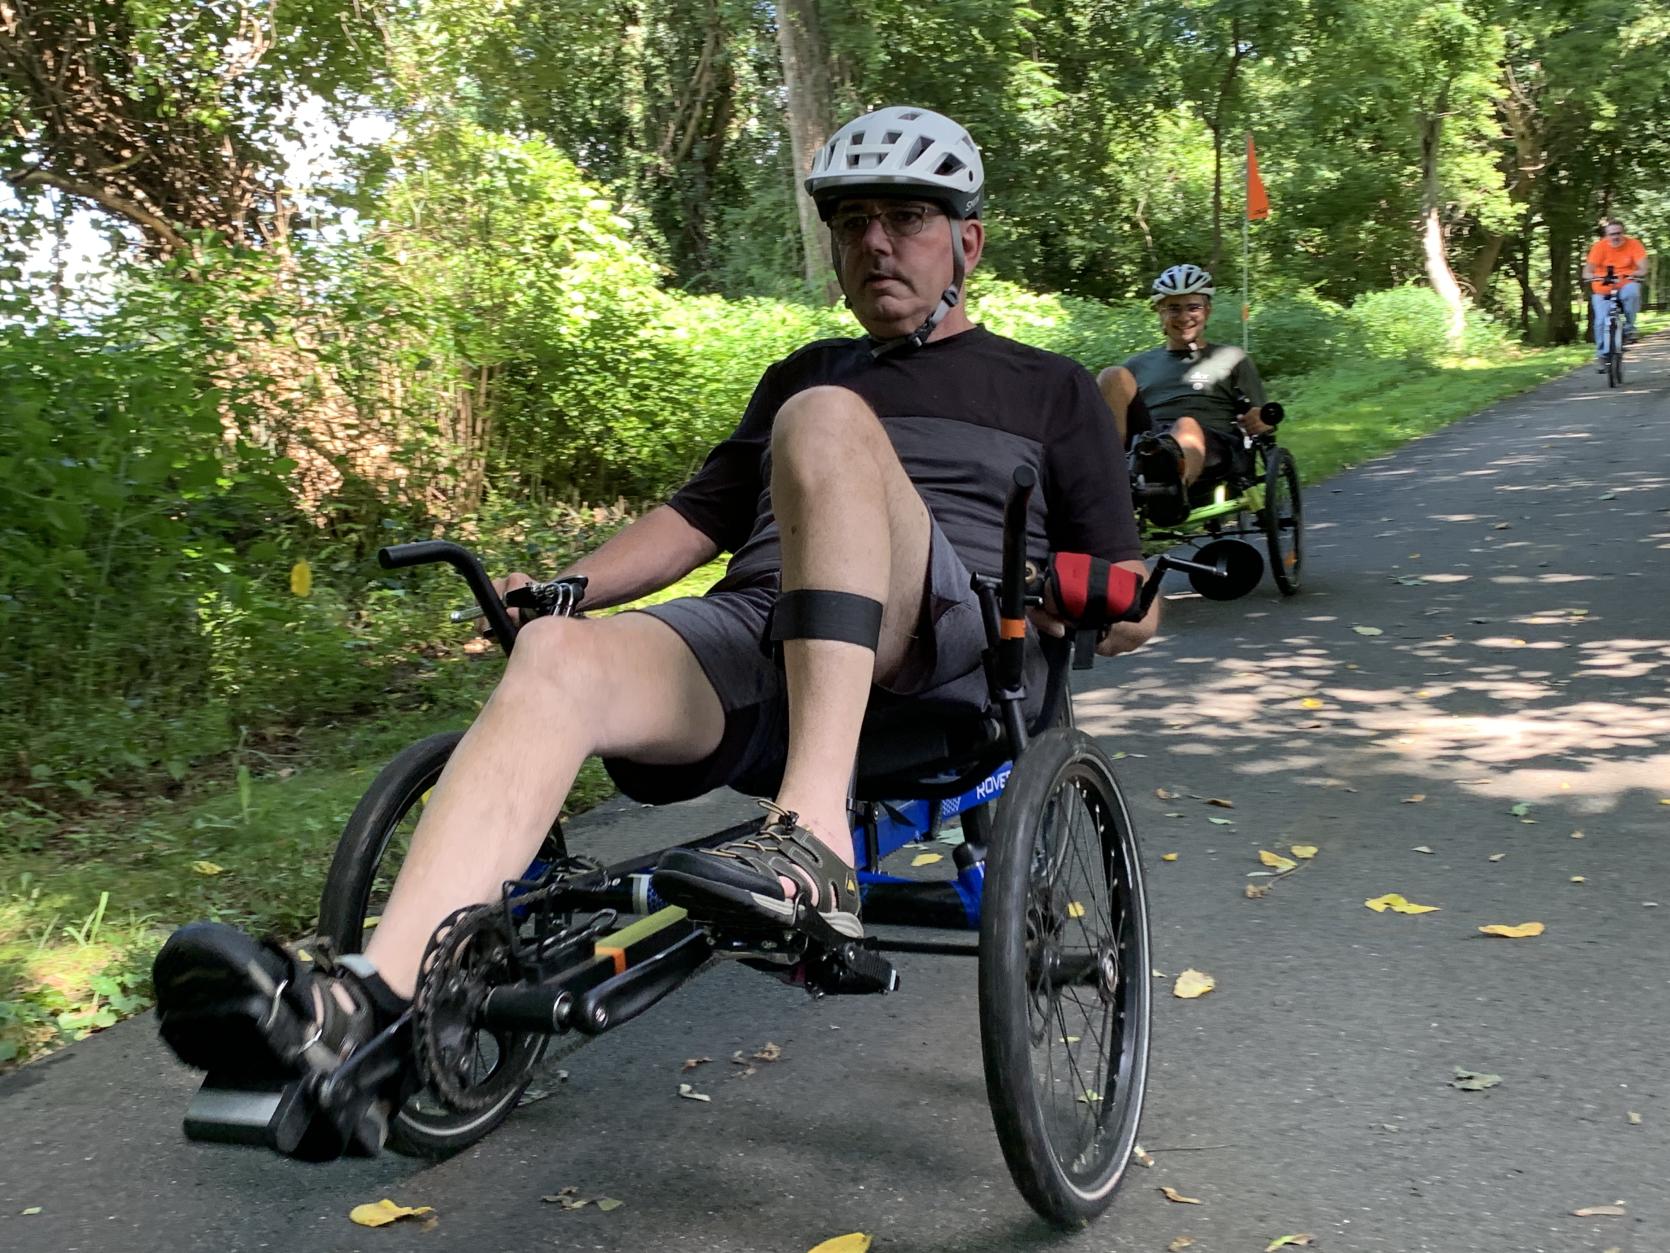 An individual riding an accessible cycle down a paved path